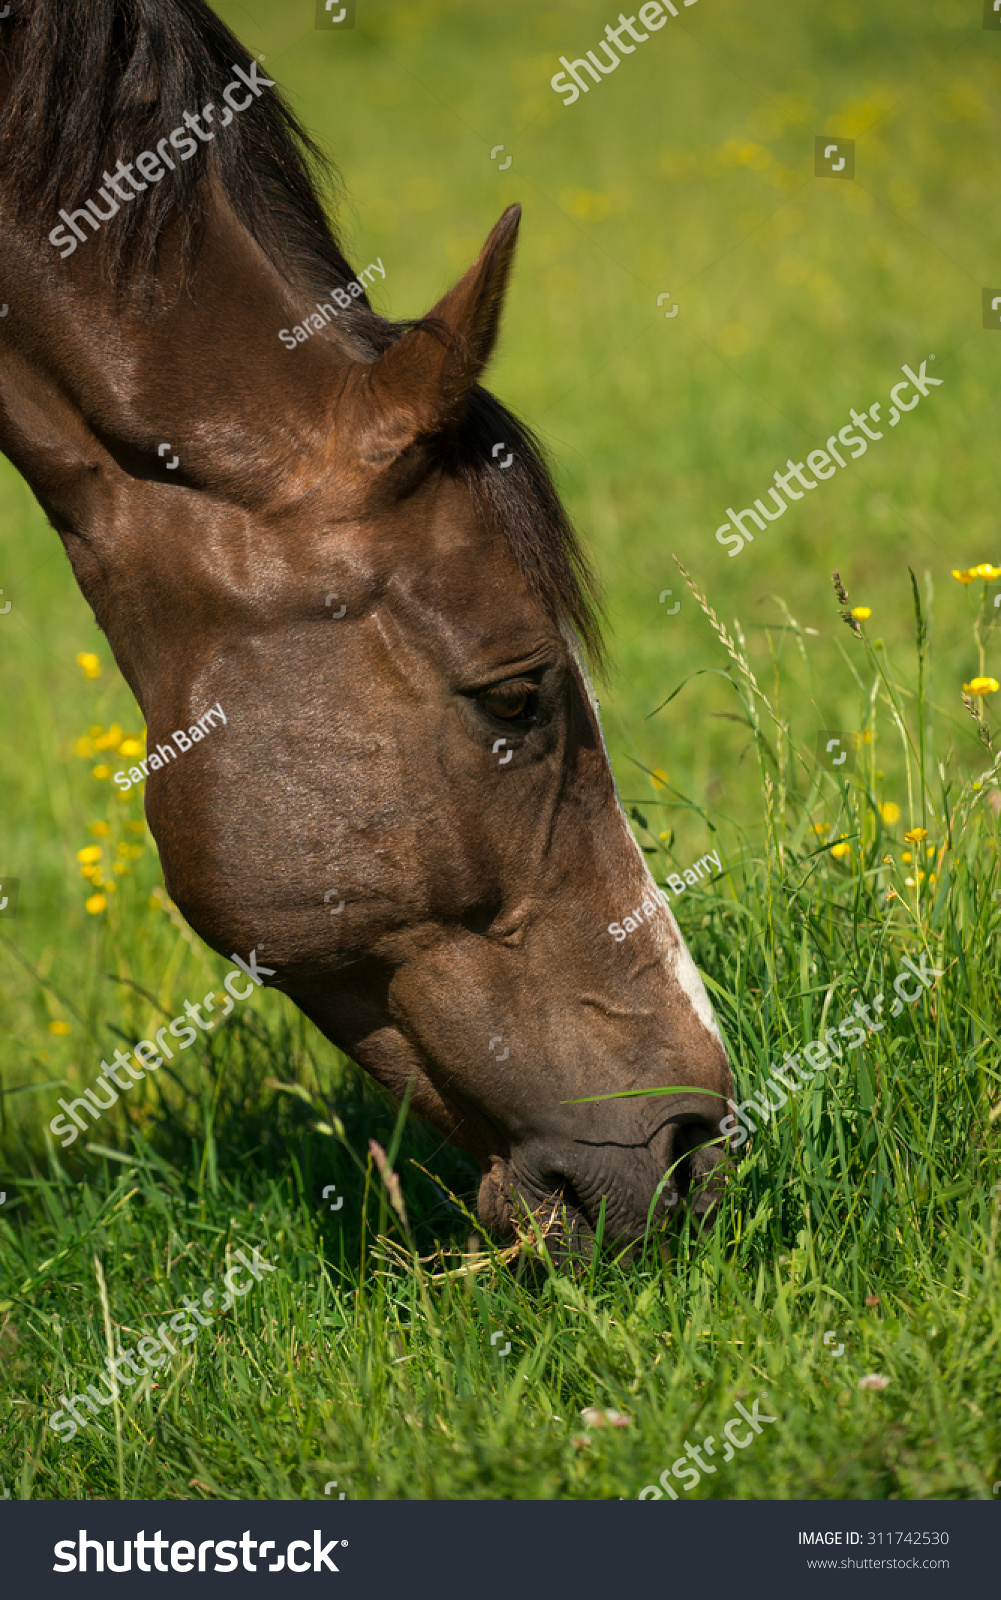 Liver chestnut horse with a white stripe, in a green grass field with yellow flowers and blue sky, eating some grass. #311742530